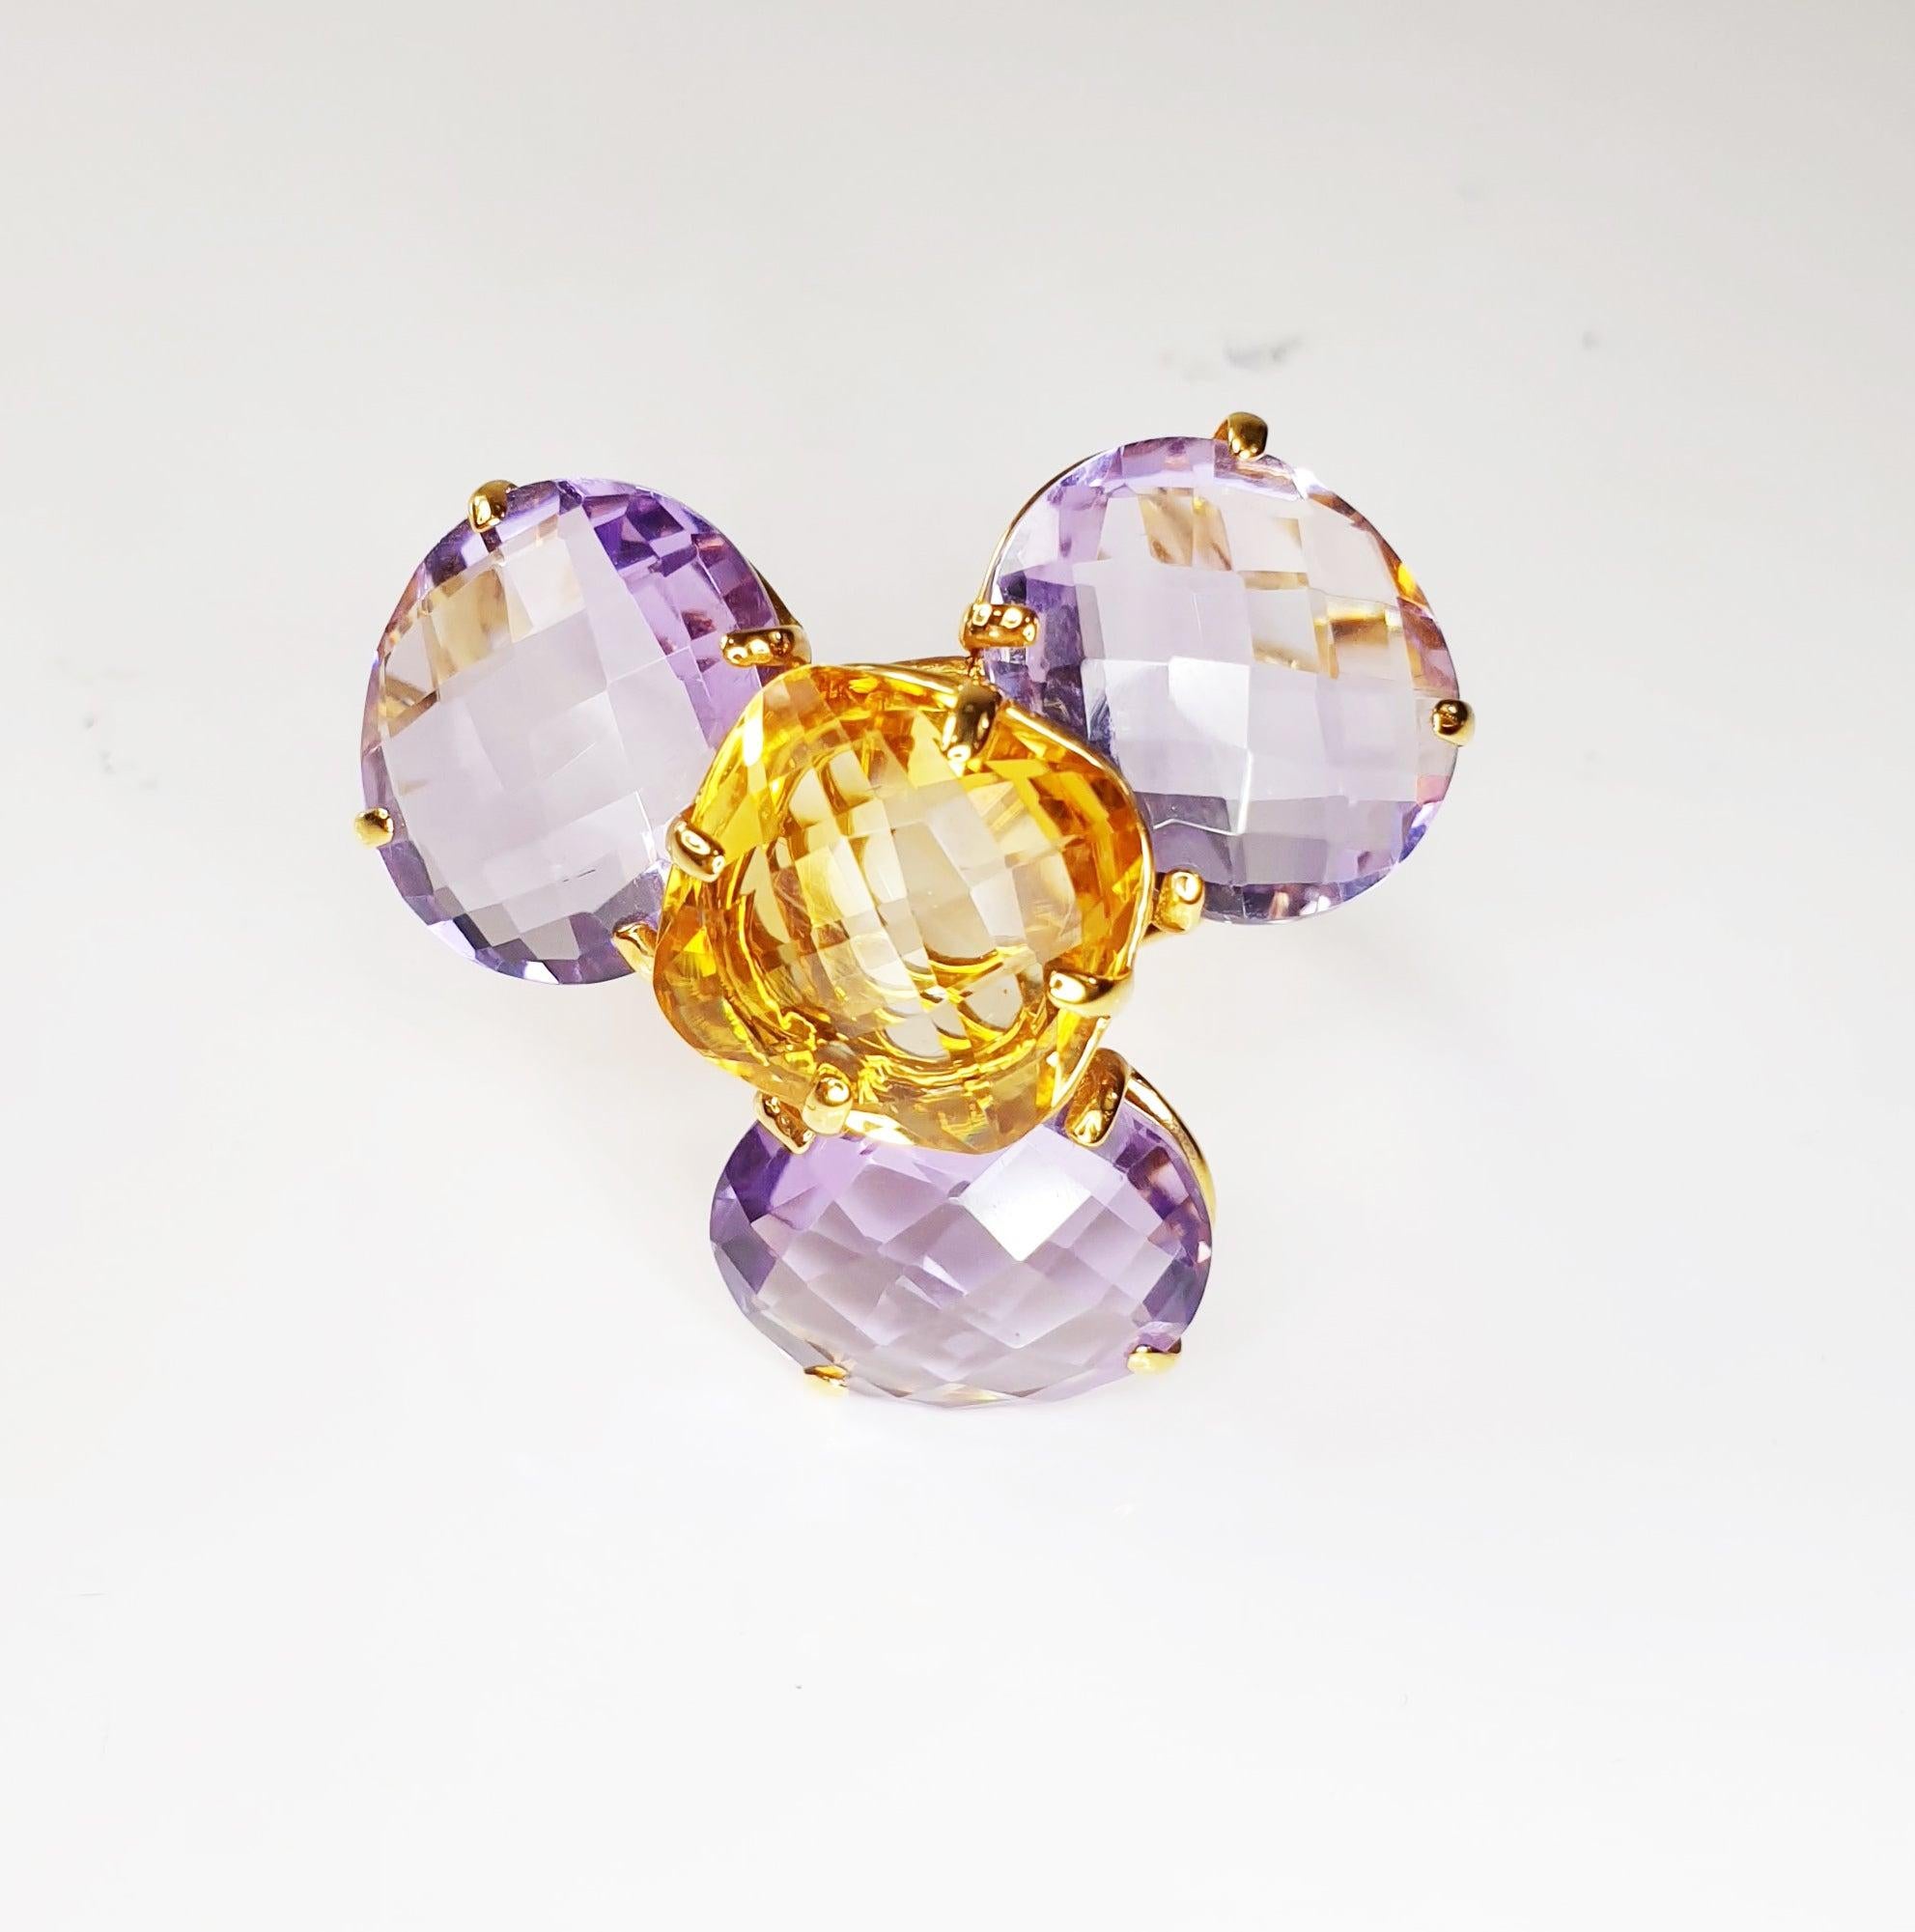 Multiphaceted Flower Ring with Central Citrine and Three Amethysts 4